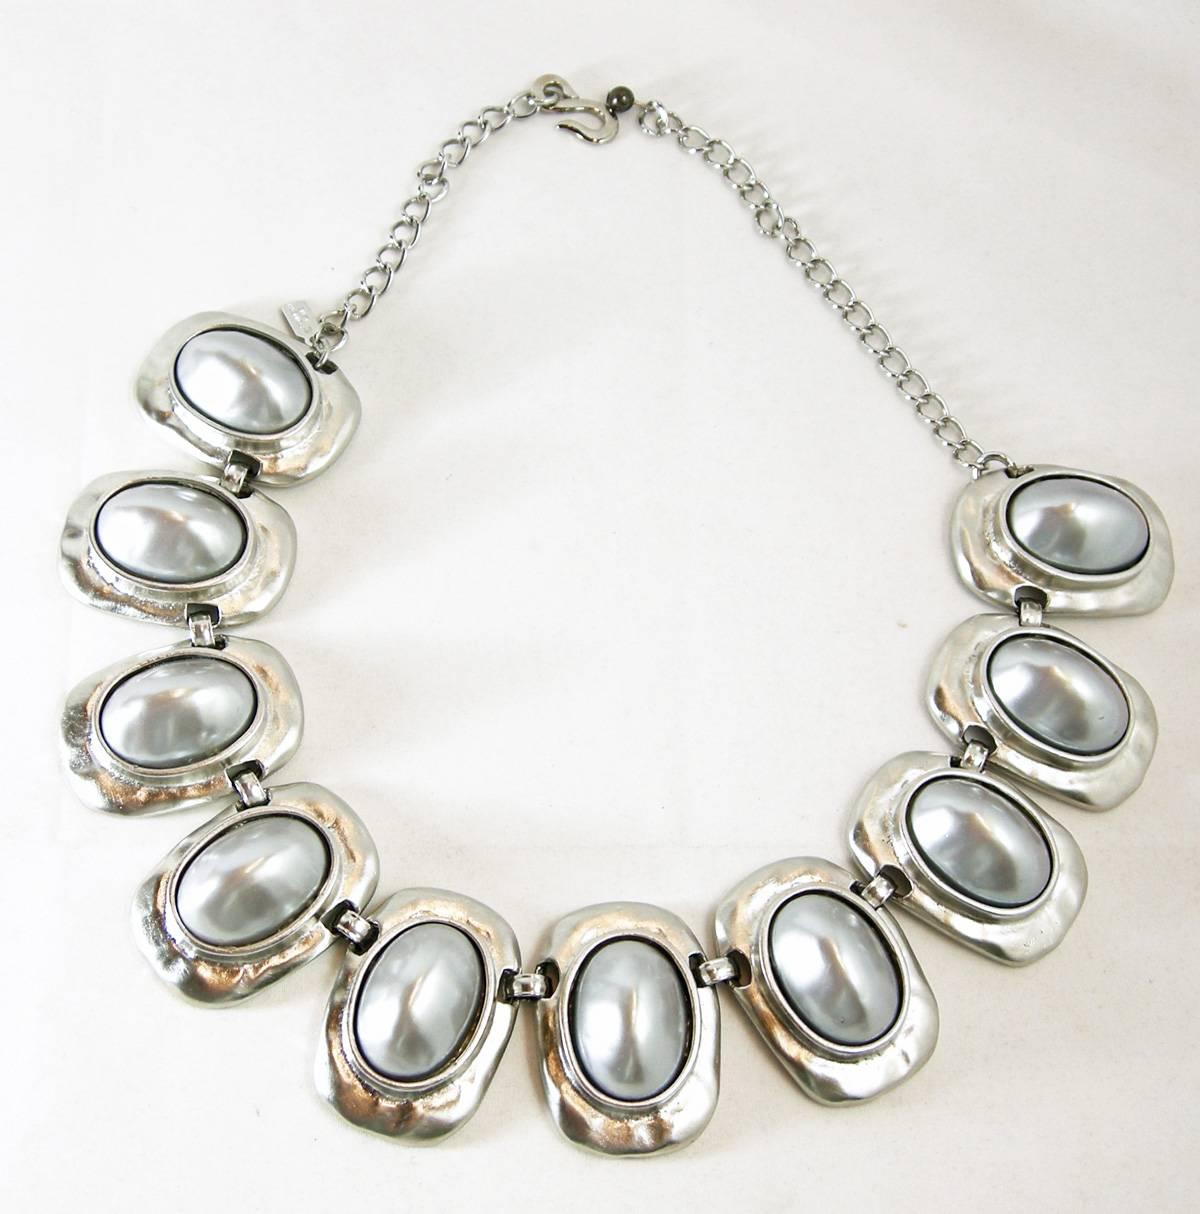 This Kenneth Jay Lane link necklace has ten links with simulated grey pearl cabochons. It is set in a silver tone setting with has a lobster clasp and measures 20” x 1-1/2”.  It is signed “Kenneth Lane” and it is in excellent condition.